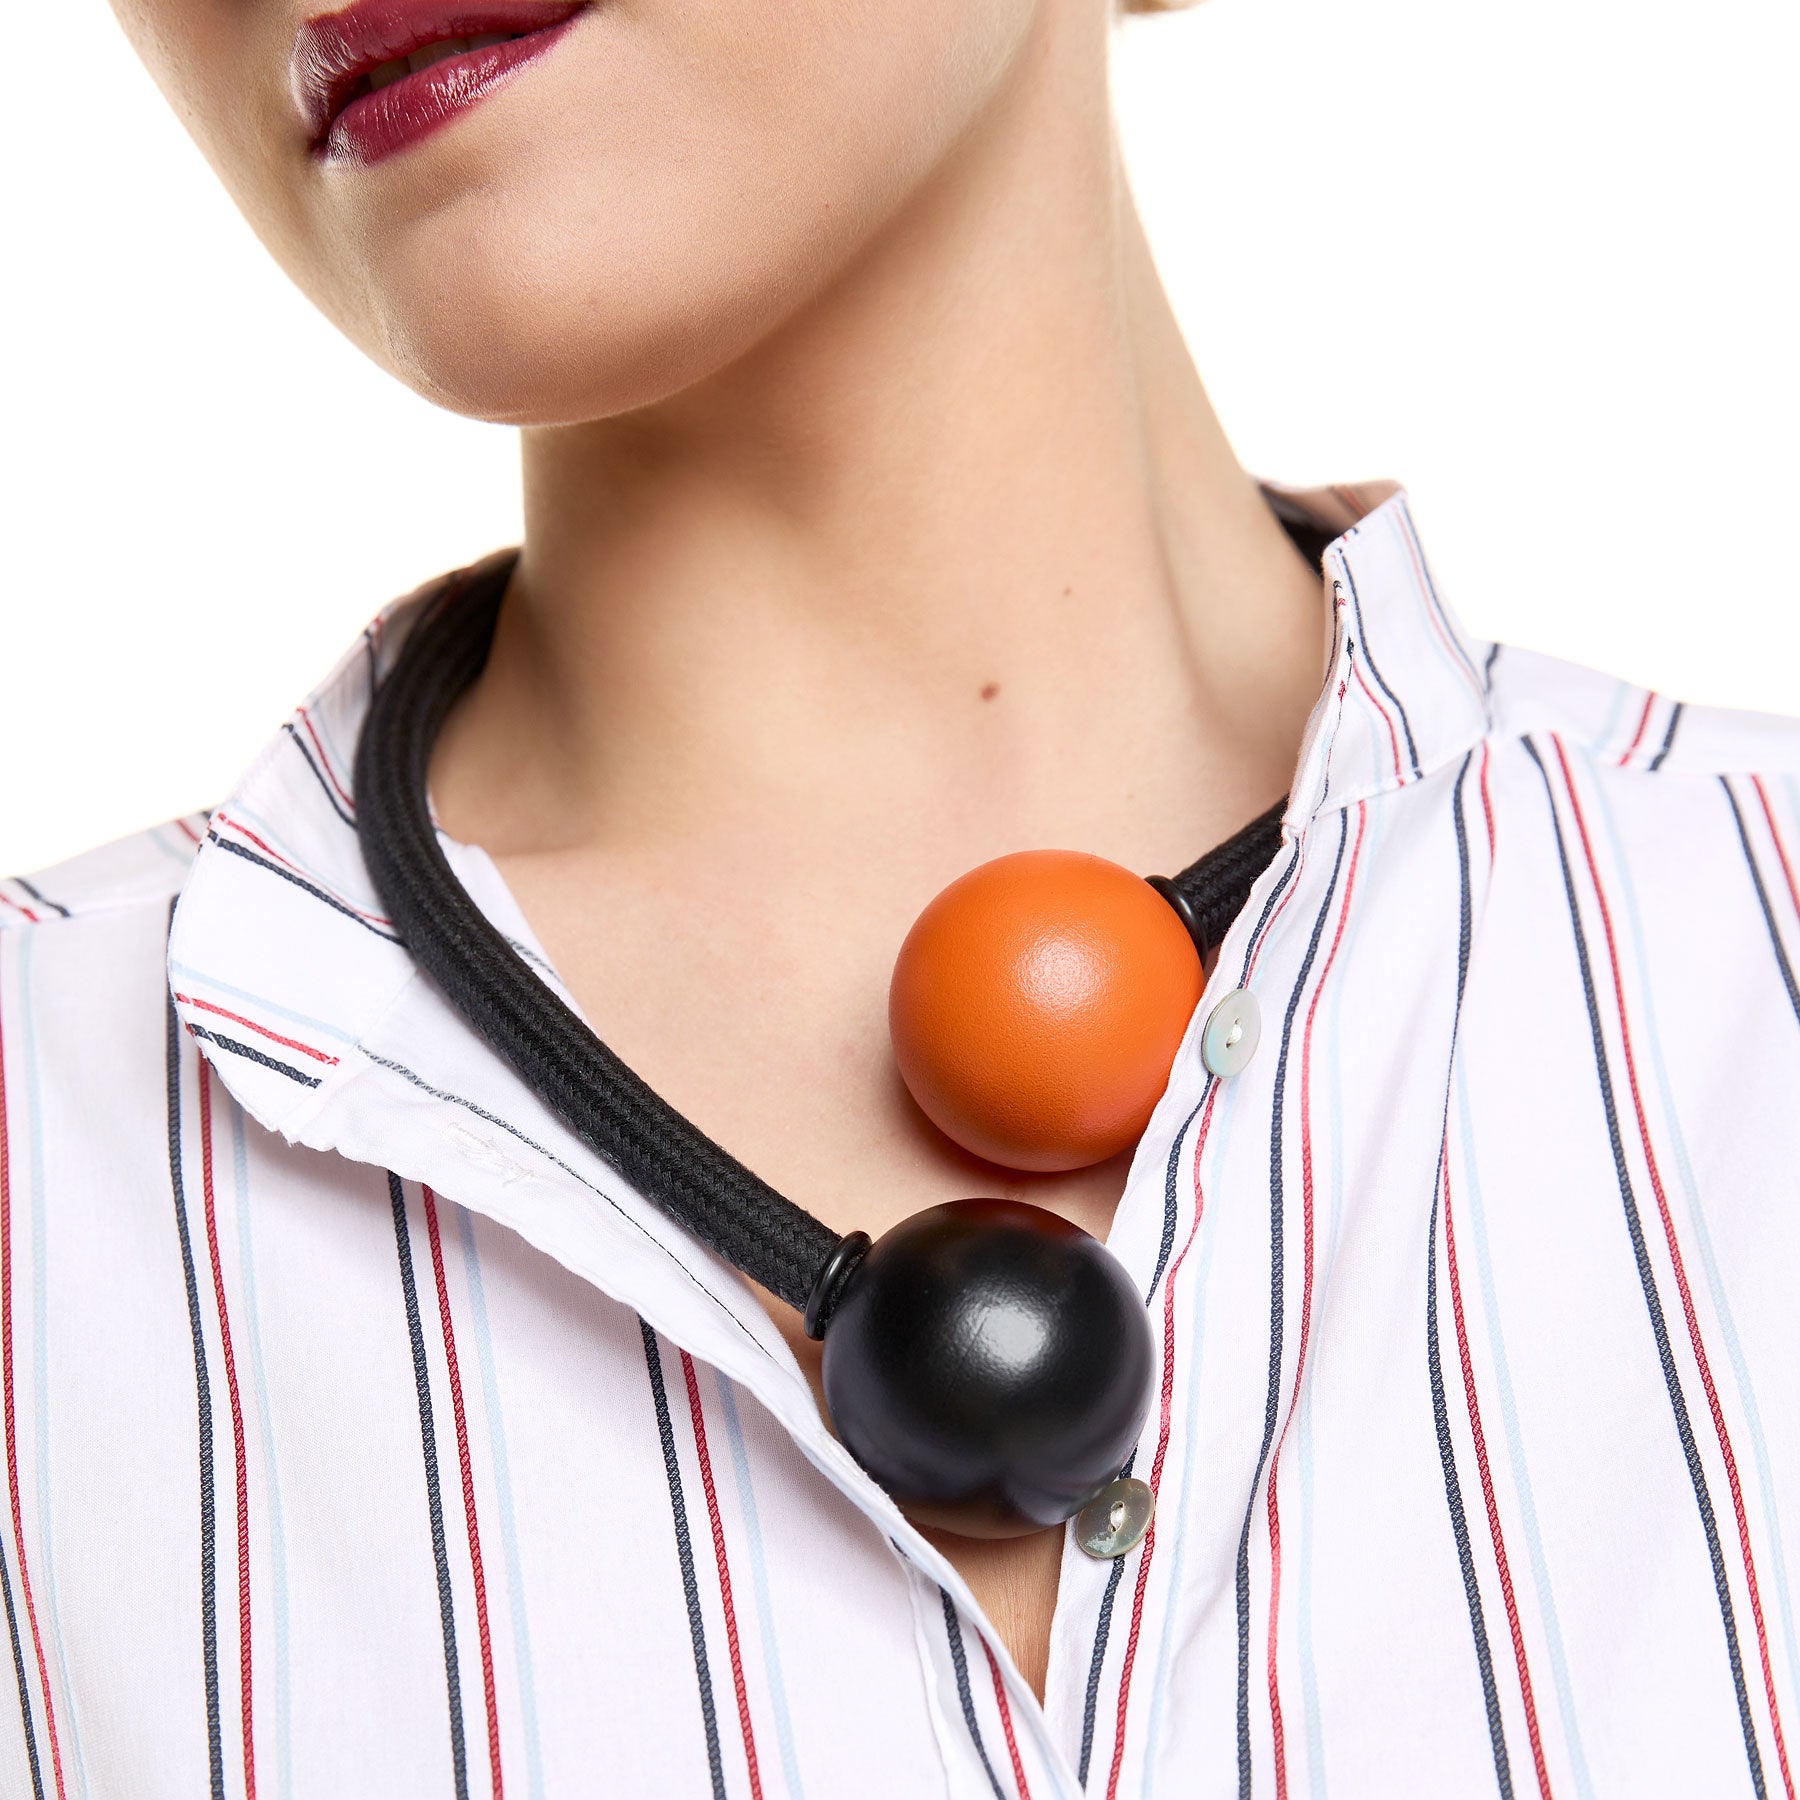 Chic & Simple Wooden Ball Necklace - Black & Orange